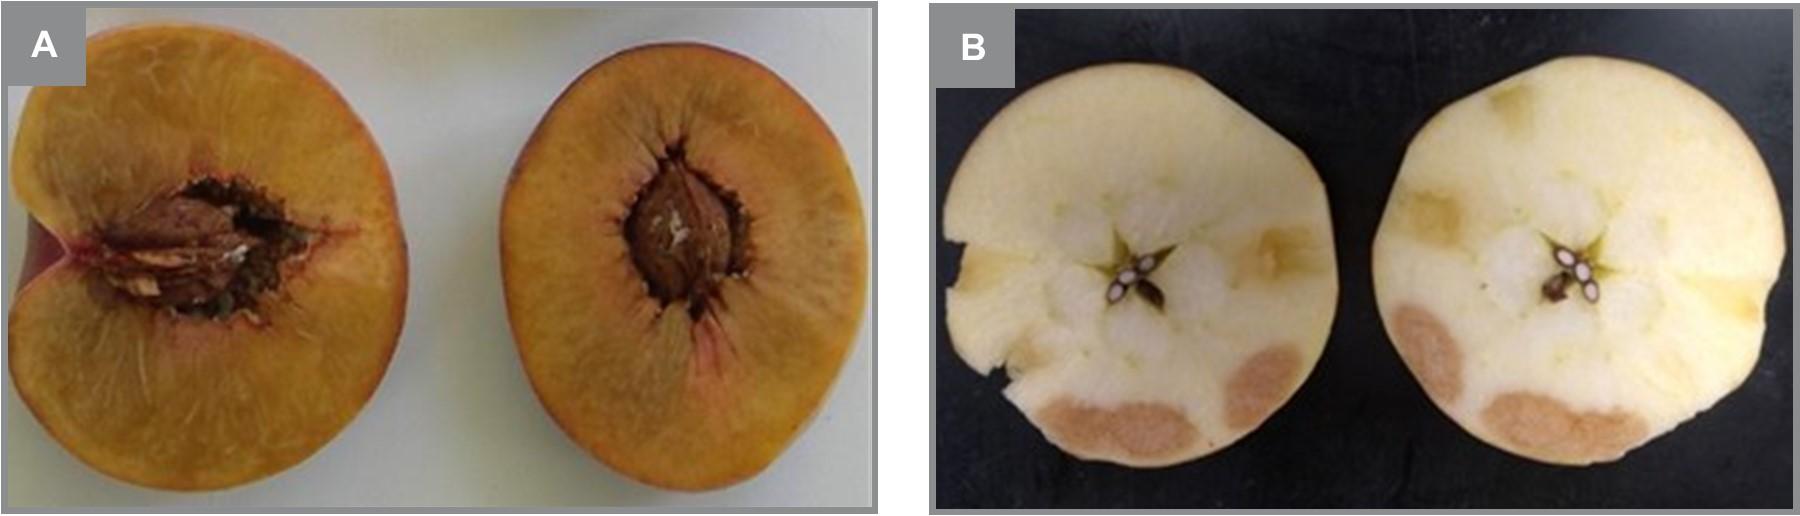 Figure 4. (A) Peaches and (B) apples with chilling injury symptoms after postharvest storage. Photo: Dr. Macarena Farcuh, University of Maryland. 